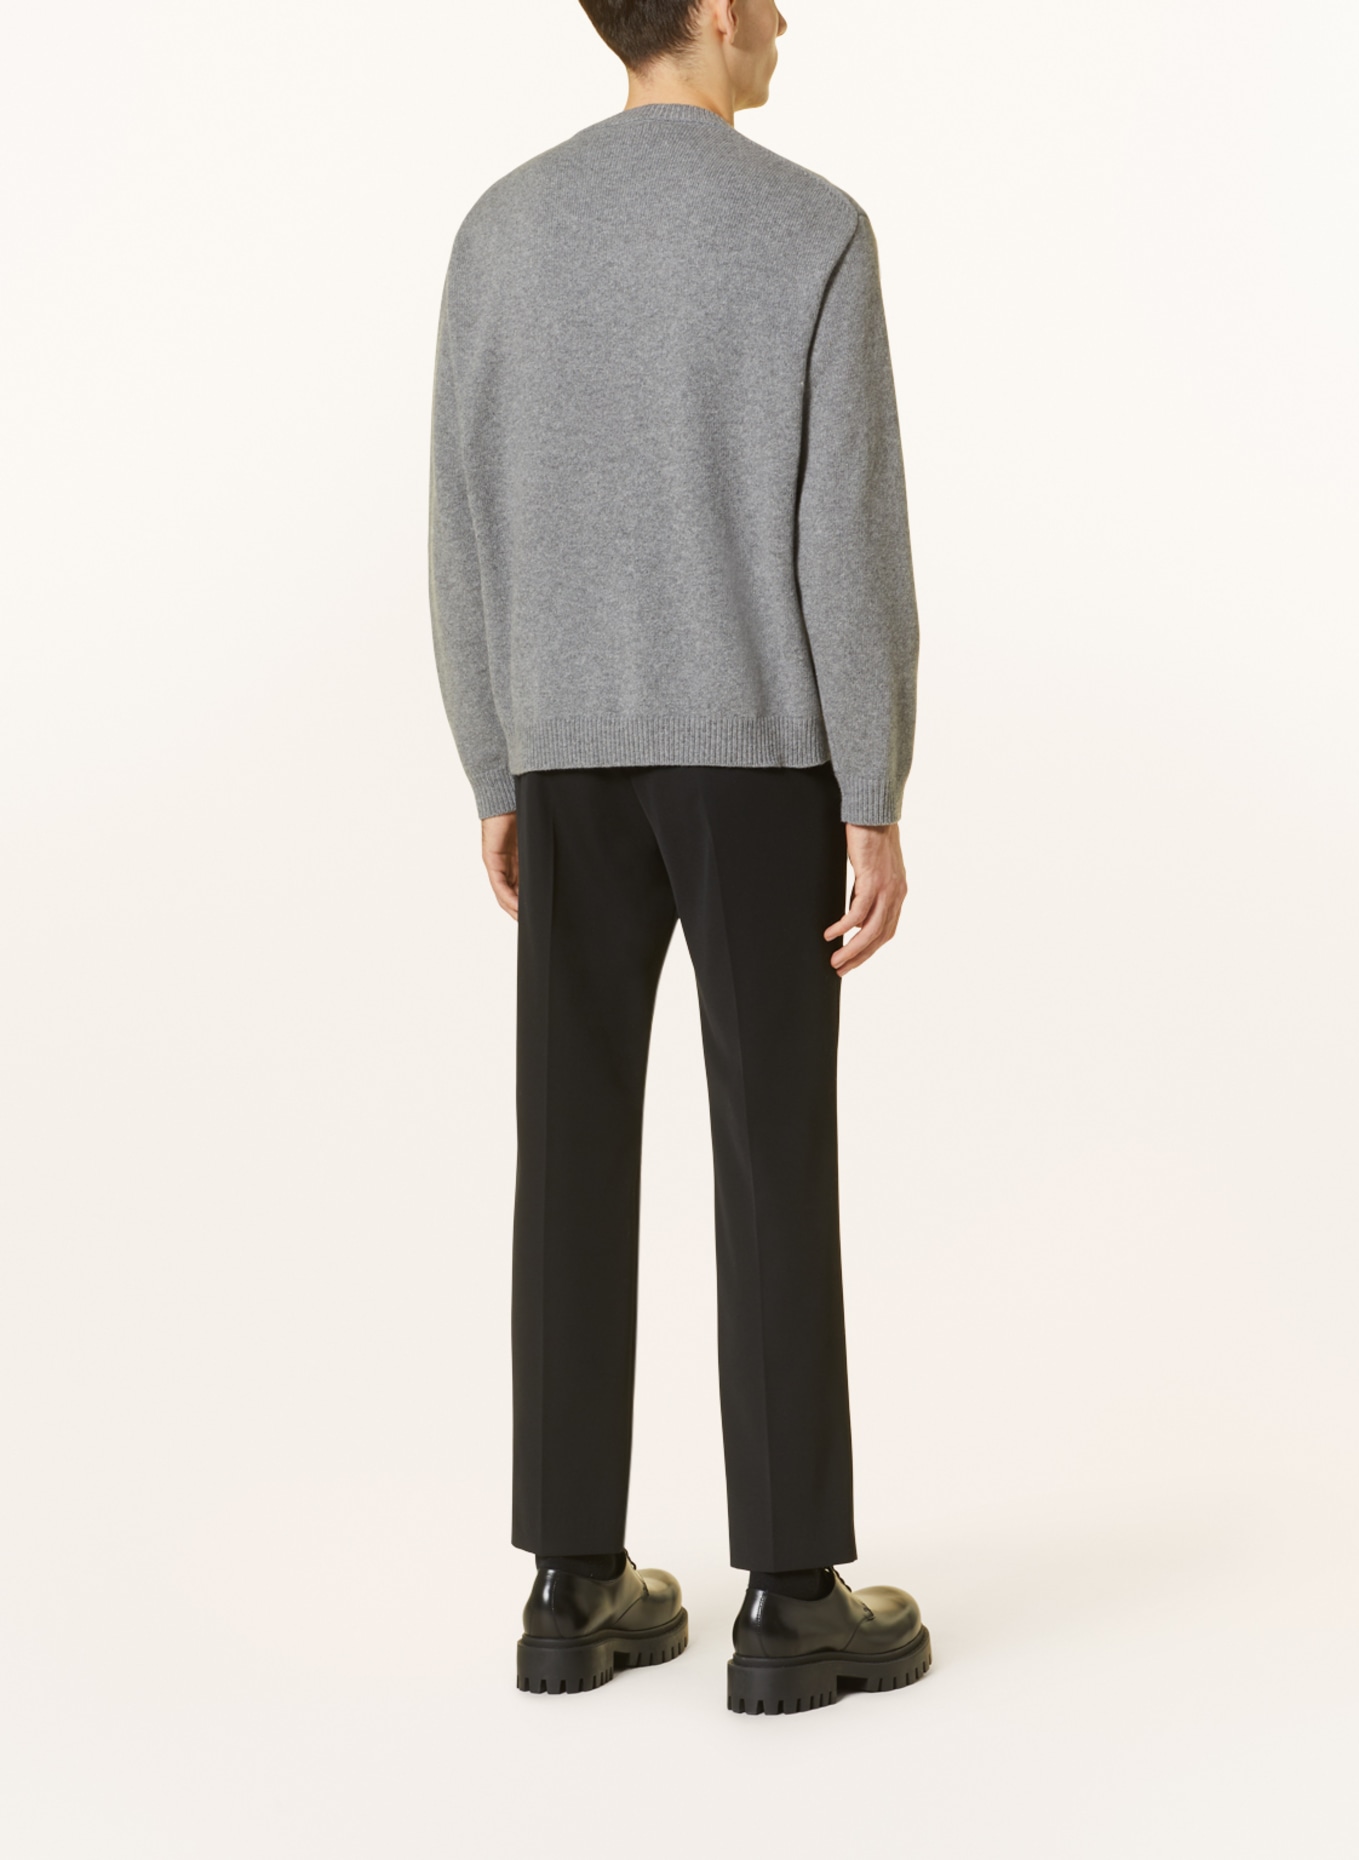 KENZO Sweater, Color: GRAY (Image 3)